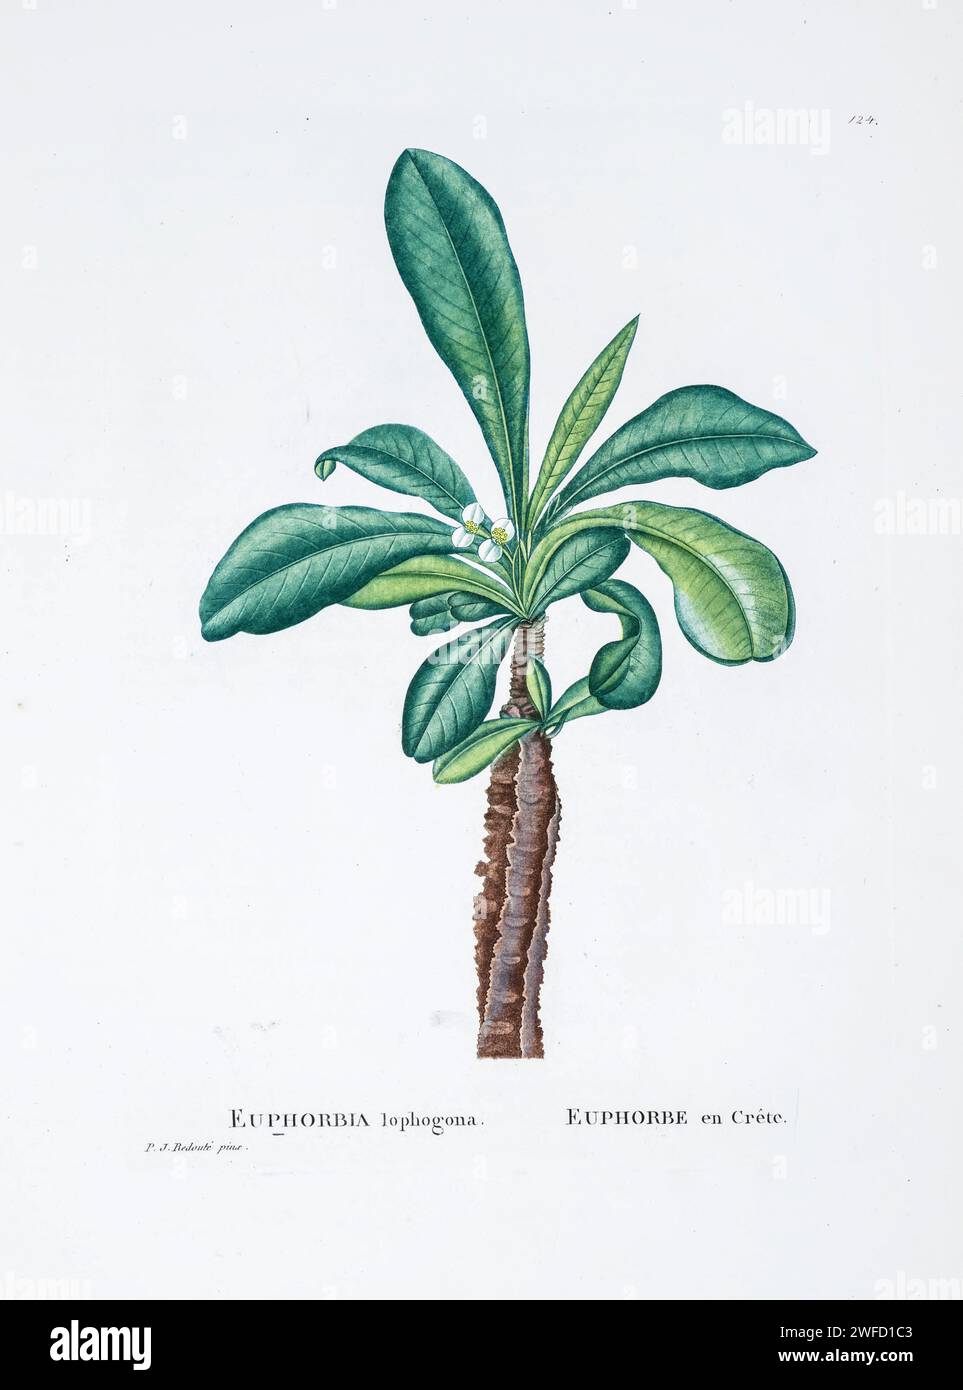 Euphorbia lophogona from History of Succulent Plants [Plantarum historia succulentarum / Histoire des plantes grasses] painted by Pierre-Joseph Redouté and described by Augustin Pyramus de Candolle 1799 Euphorbia lophogona is a species of plant in the family Euphorbiaceae. It is endemic to Madagascar. Its natural habitat is subtropical or tropical dry forests. Stock Photo